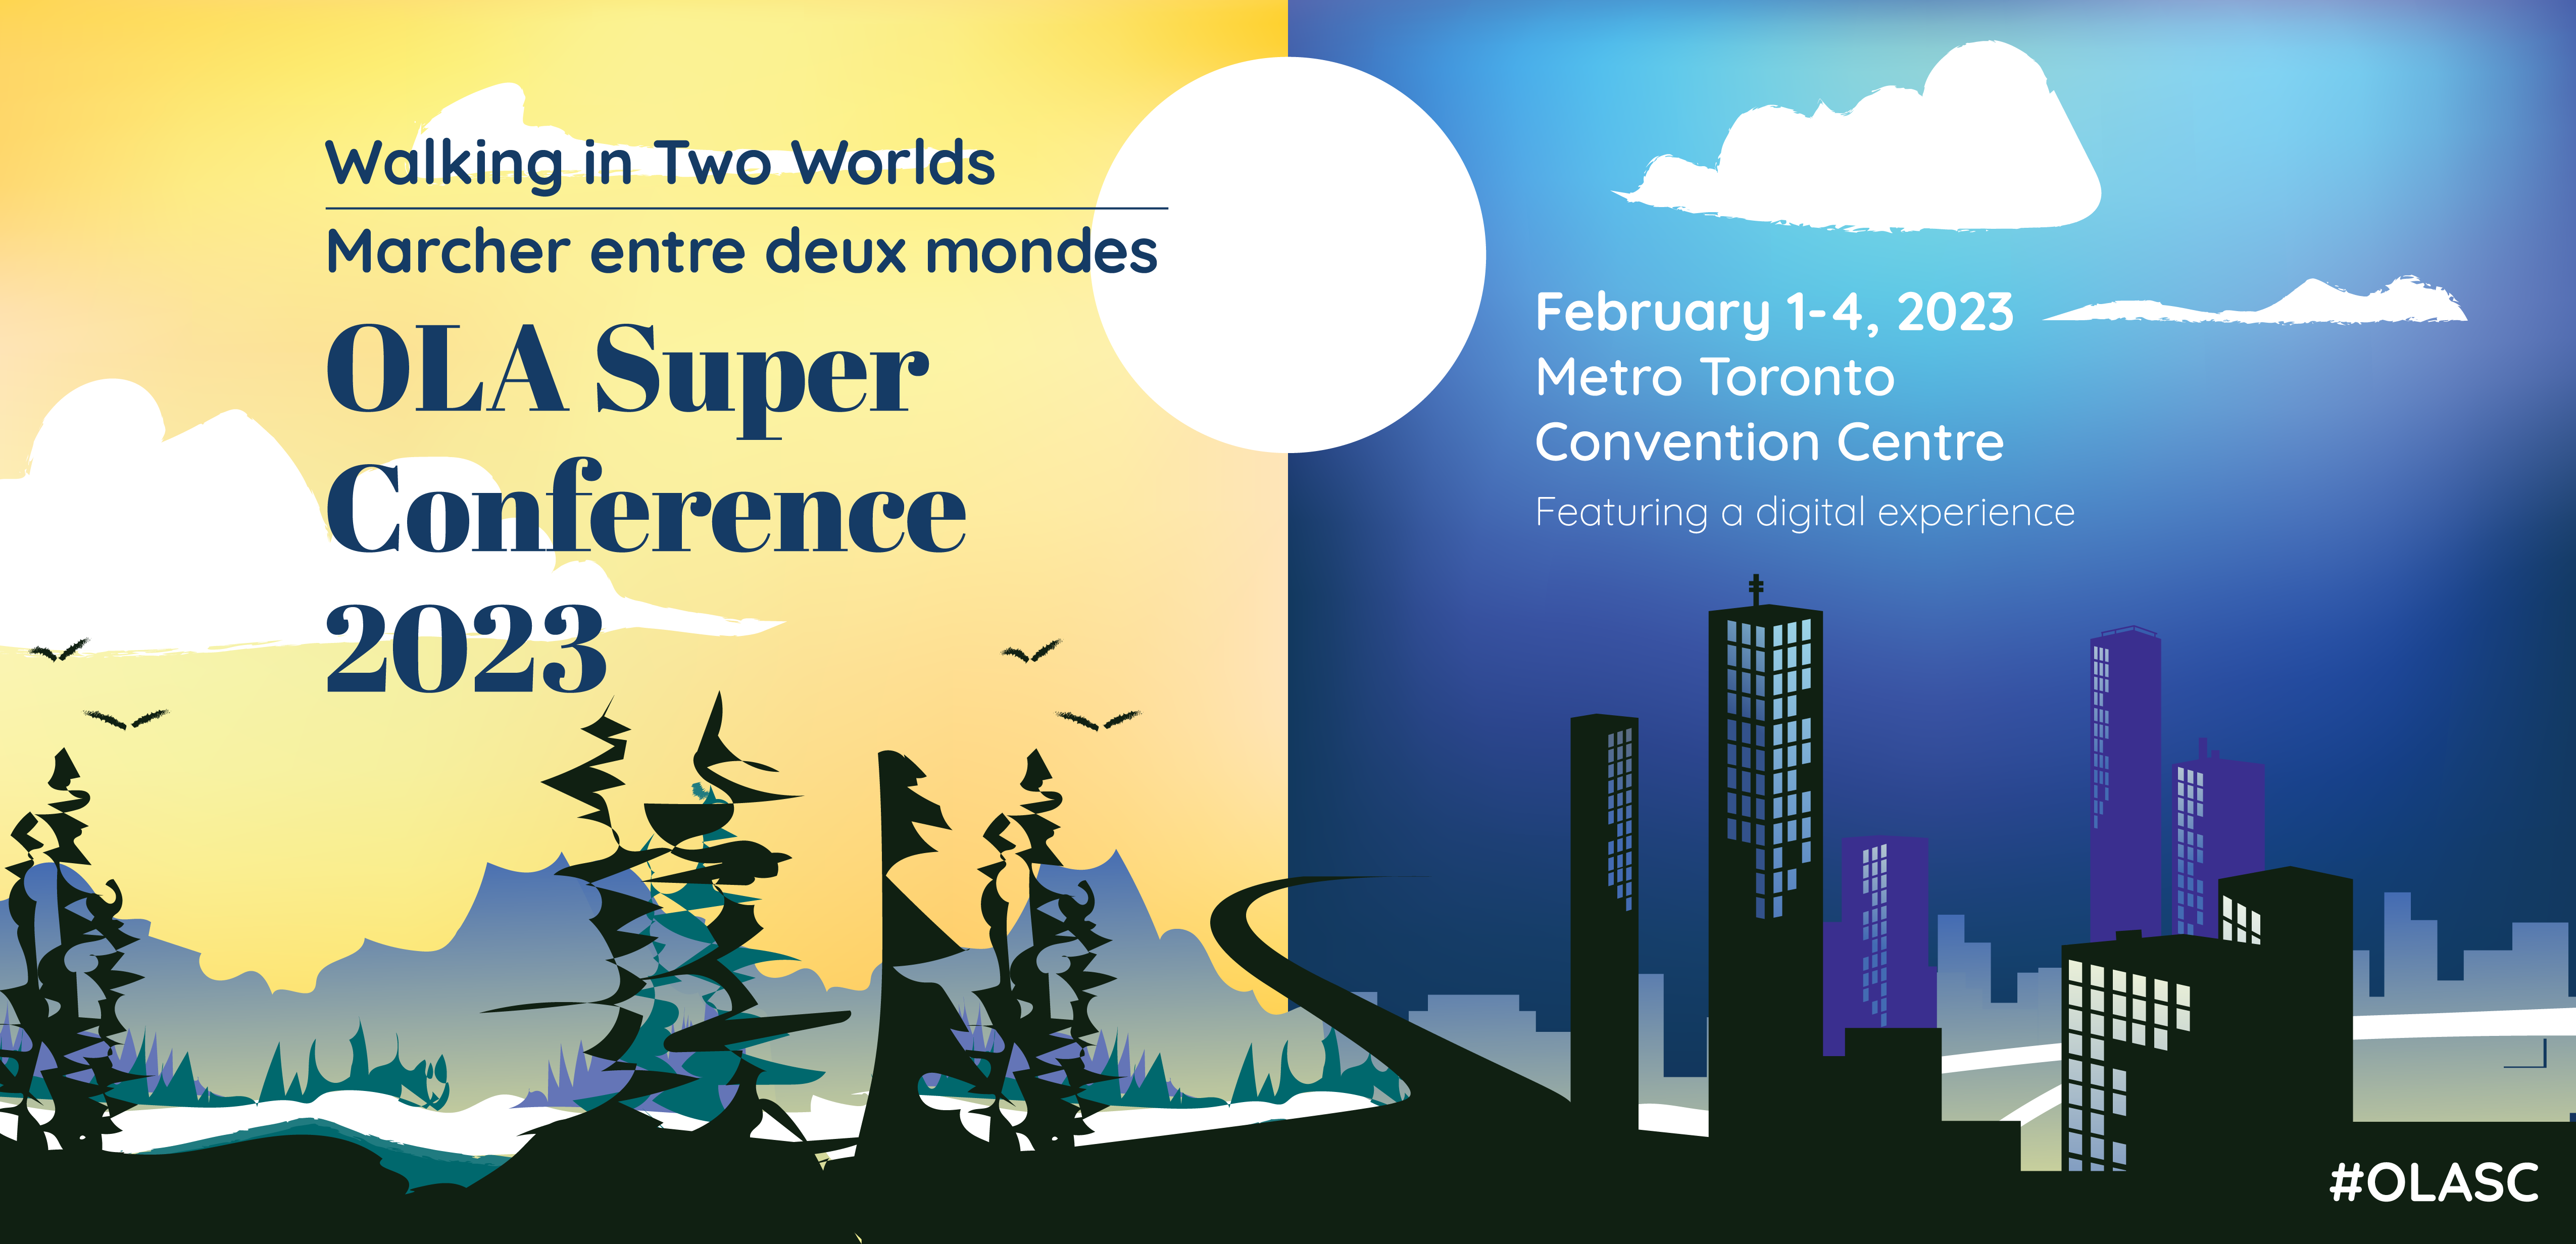 Image is the event poster which states: "Walking in Two Worlds OLA Super Conference. February 1-4, 2023 Metro Toronto Convention Centre. Featuring a digital Experience. #OLASC